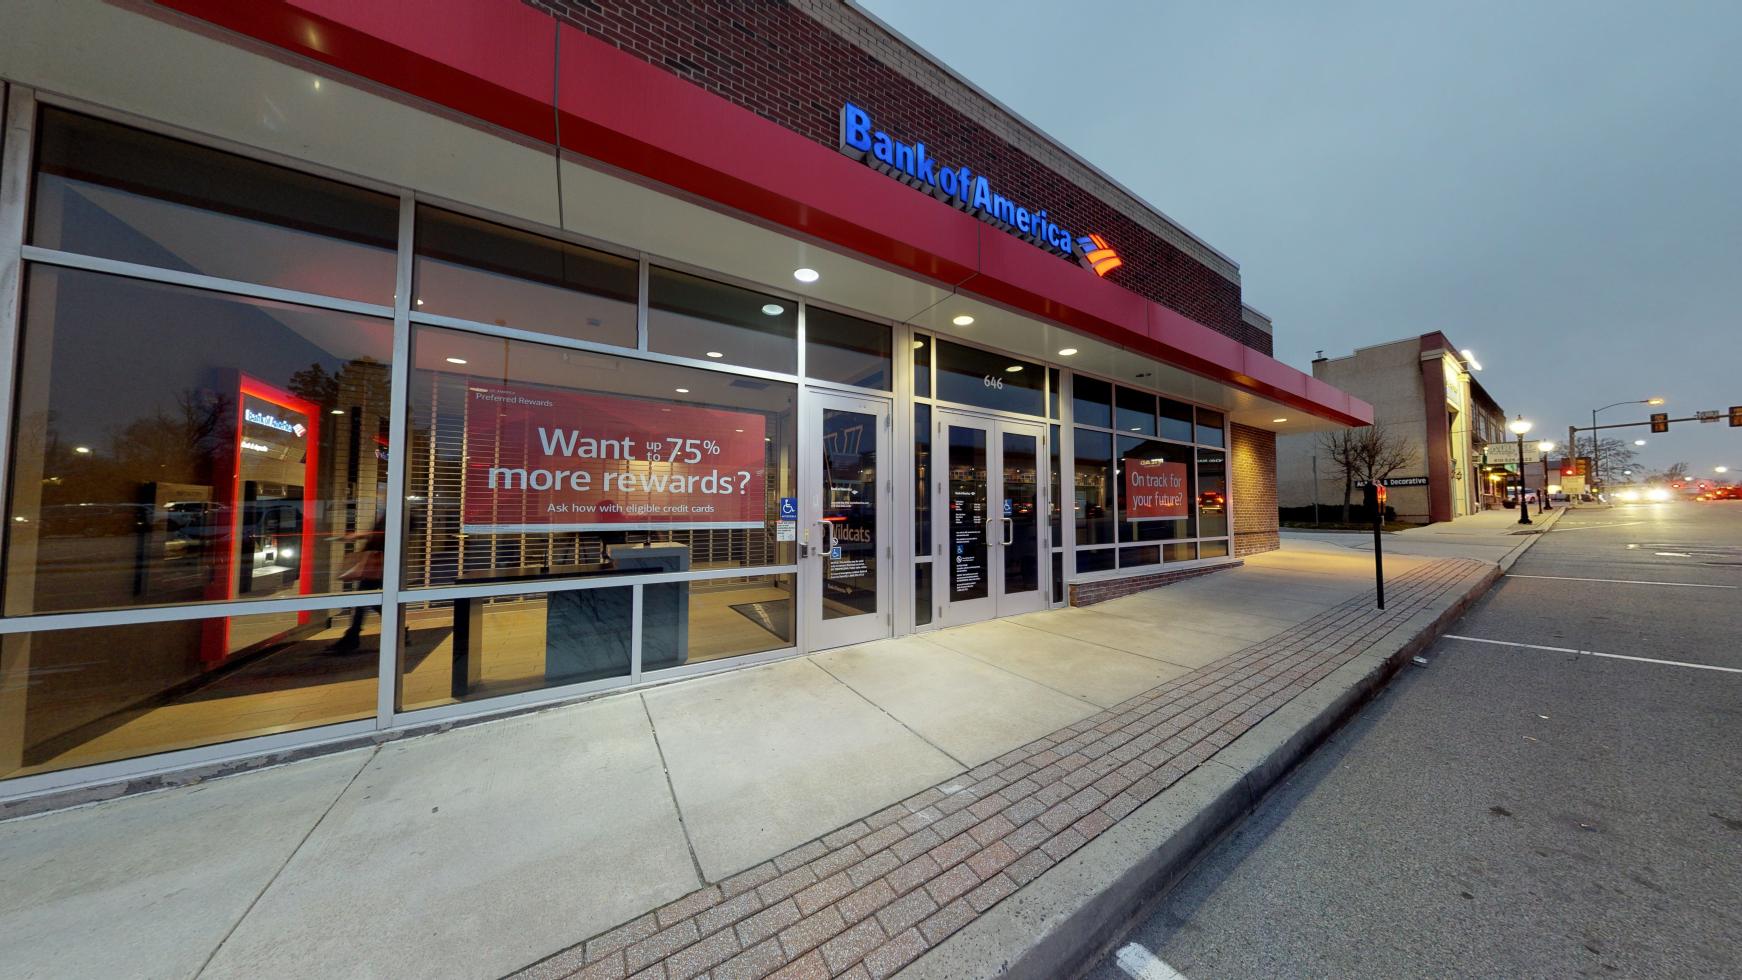 Bank of America financial center with walk-up ATM | 646 W Lancaster Ave, Bryn Mawr, PA 19010